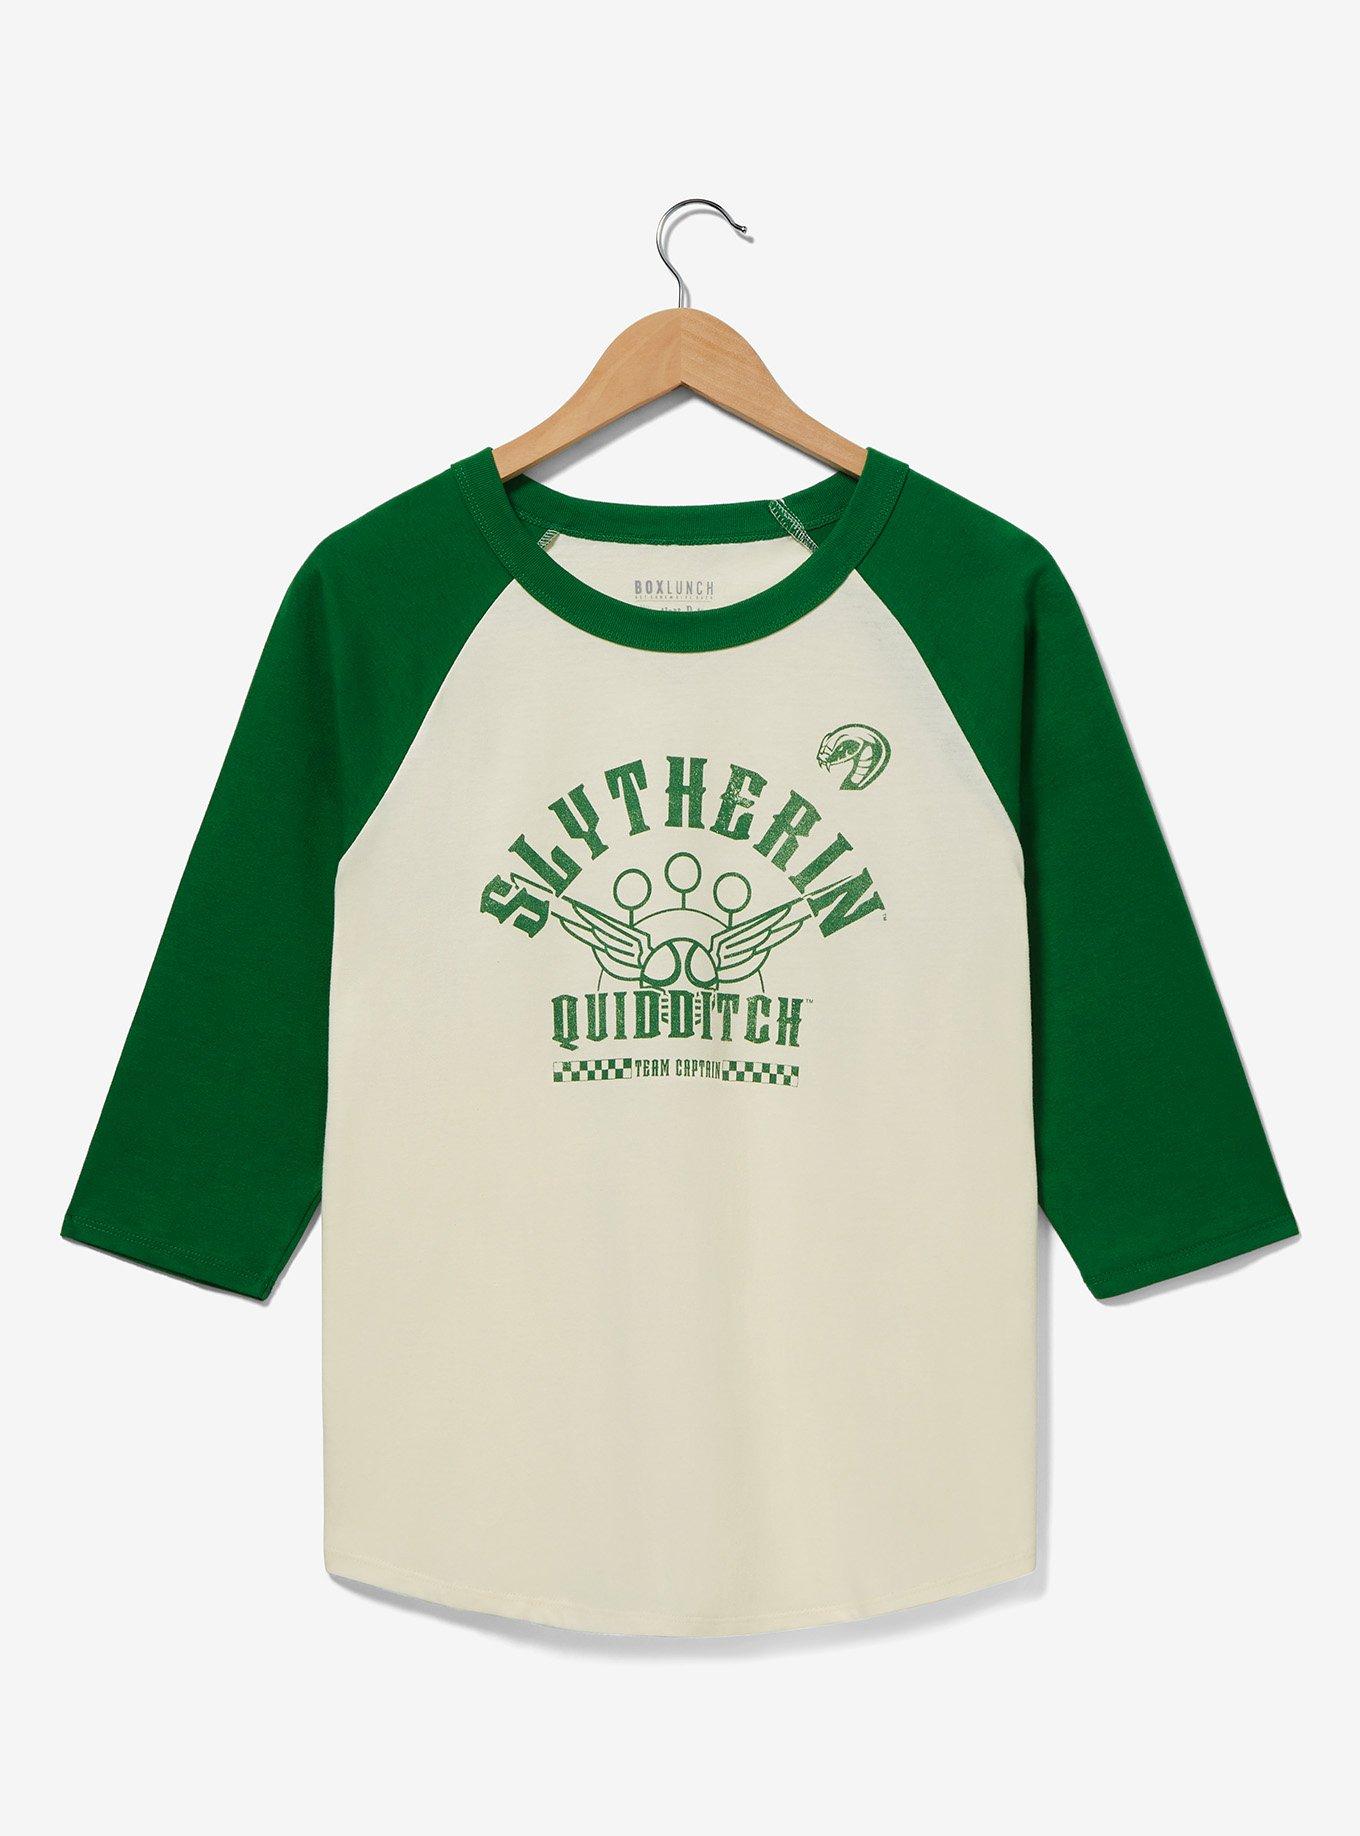 Exclusive Harry Potter | Raglan Slytherin BoxLunch - Quidditch BoxLunch T-Shirt